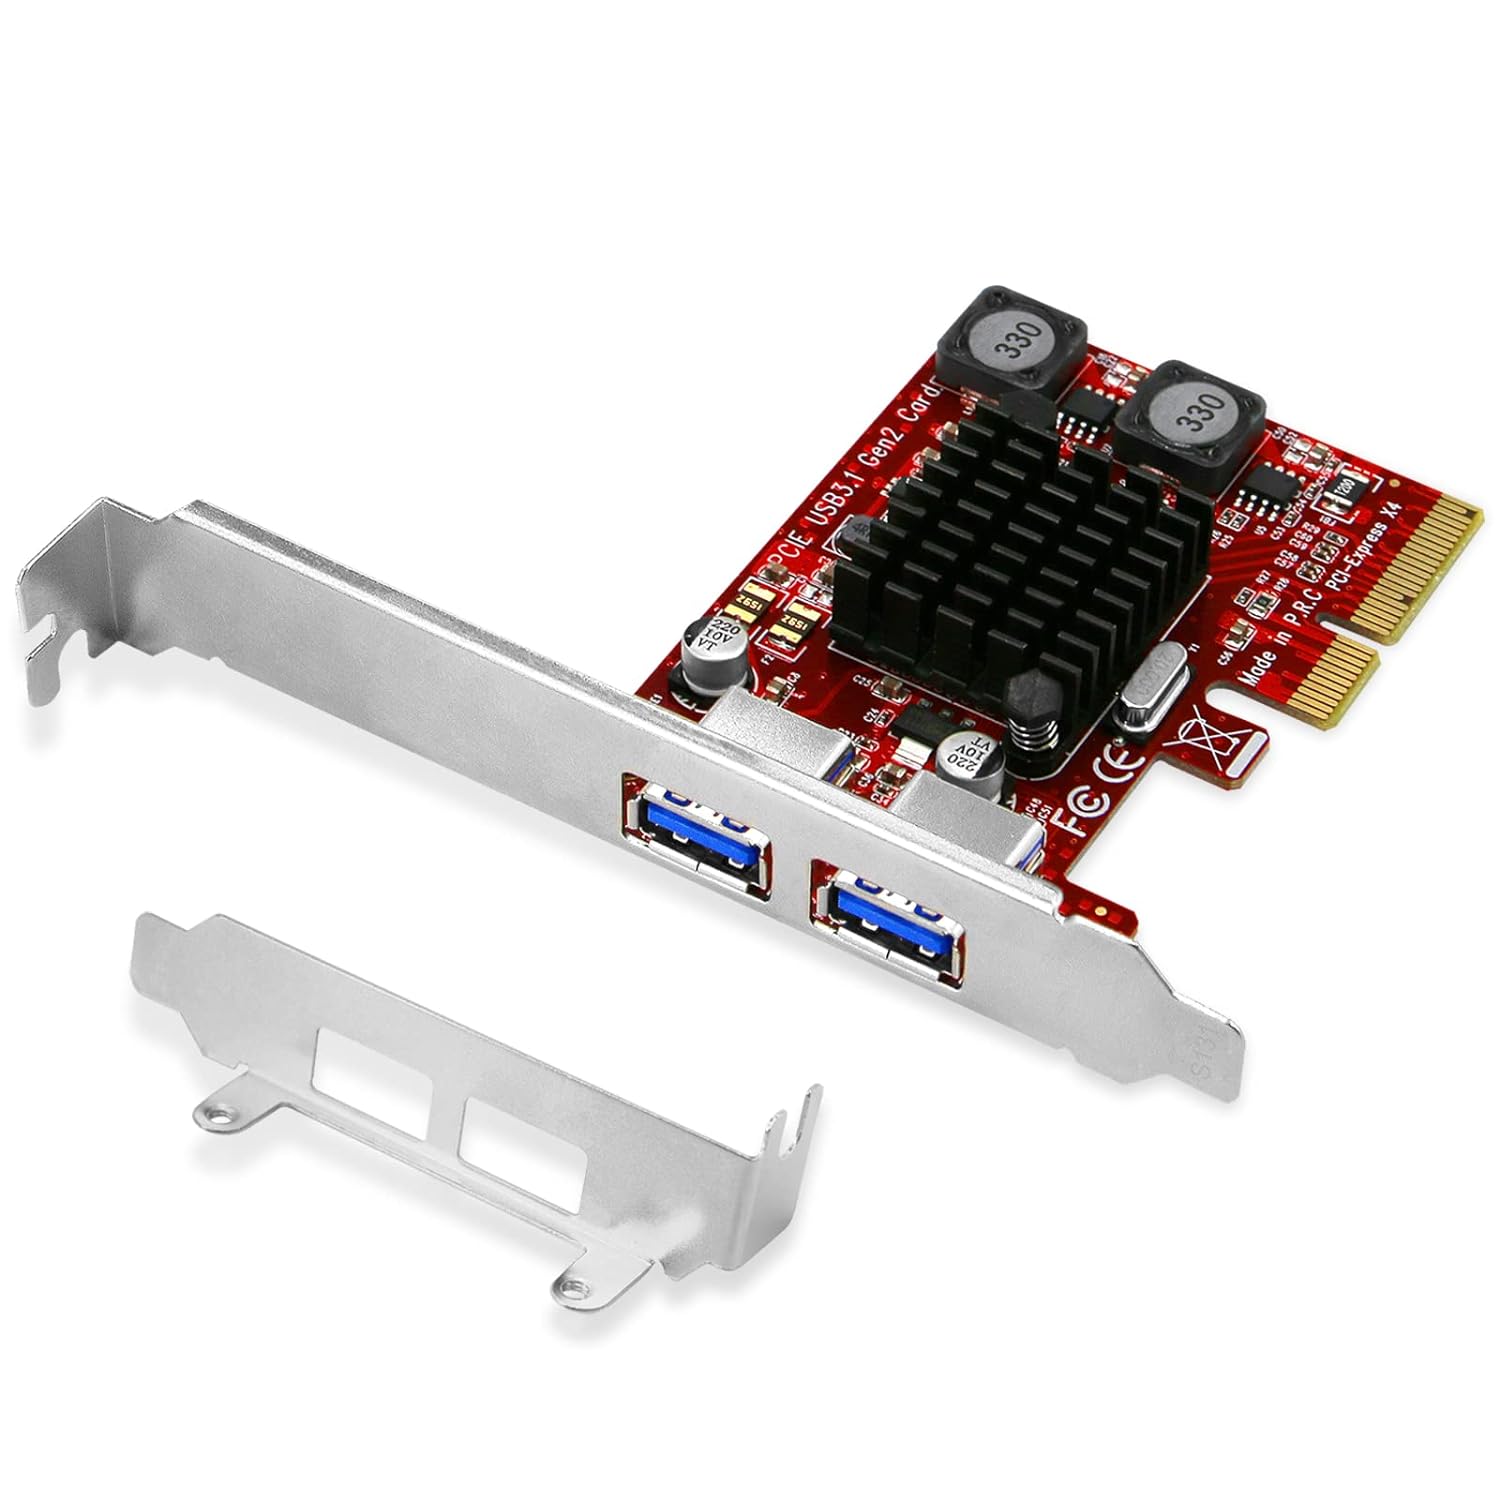 PCIE to 2 USB 3.1 GEN2 Type A 10Gbps Ports Expansion Card for Windows 7, 8.1, 10, 11 (32/64) and MAC OS 10.9,10.10,10.12,10.13,10.14,10.15 PCs, Built in Smart Power Control Technology (PCE-U312A)